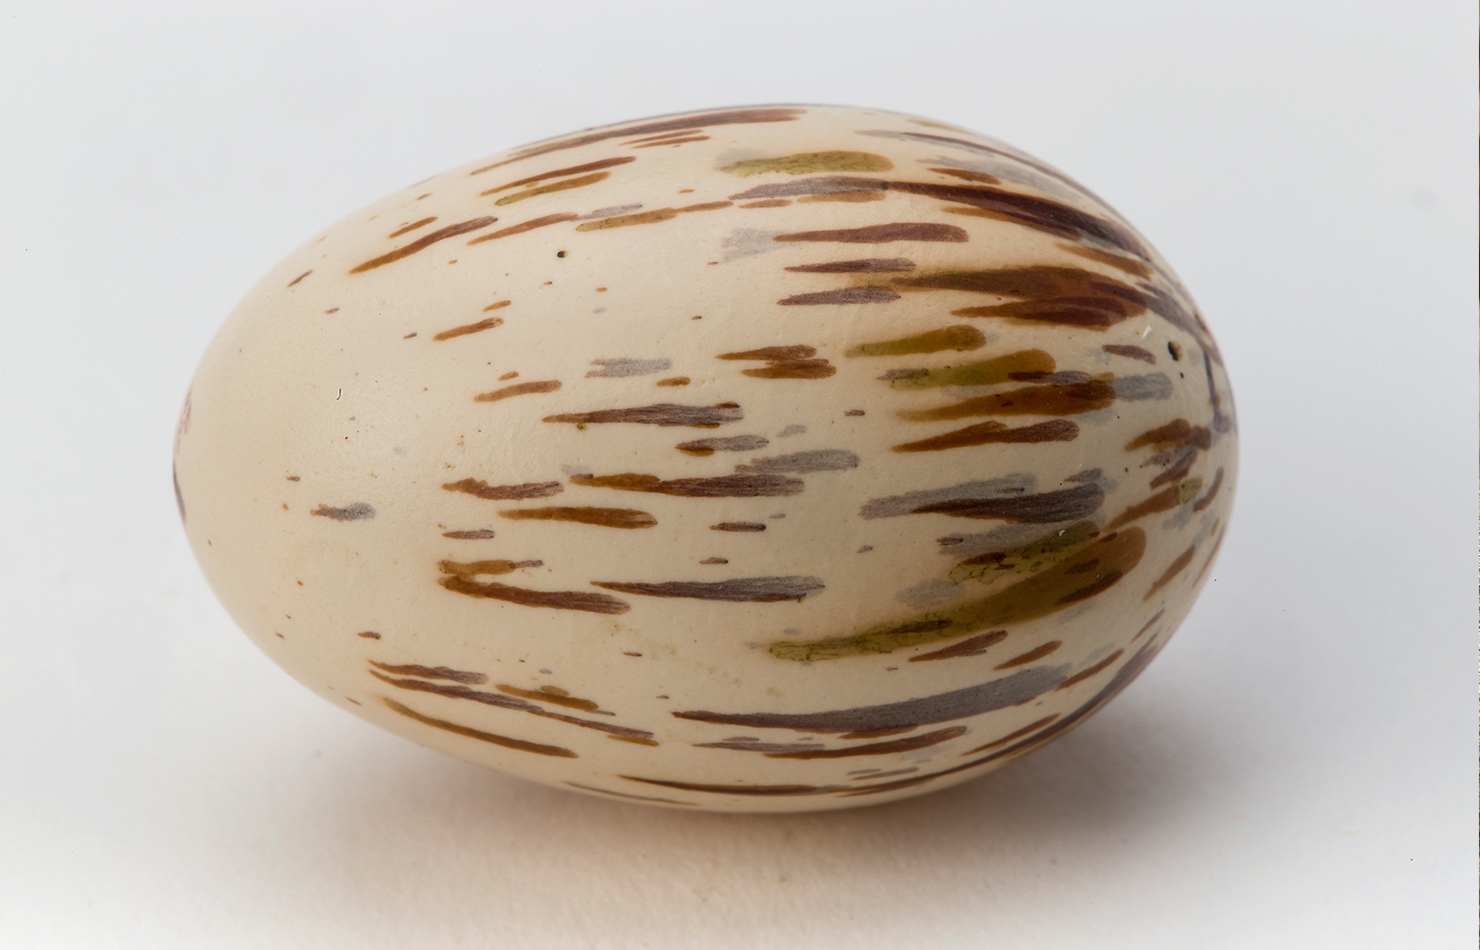 Cock-of-the-rock egg.